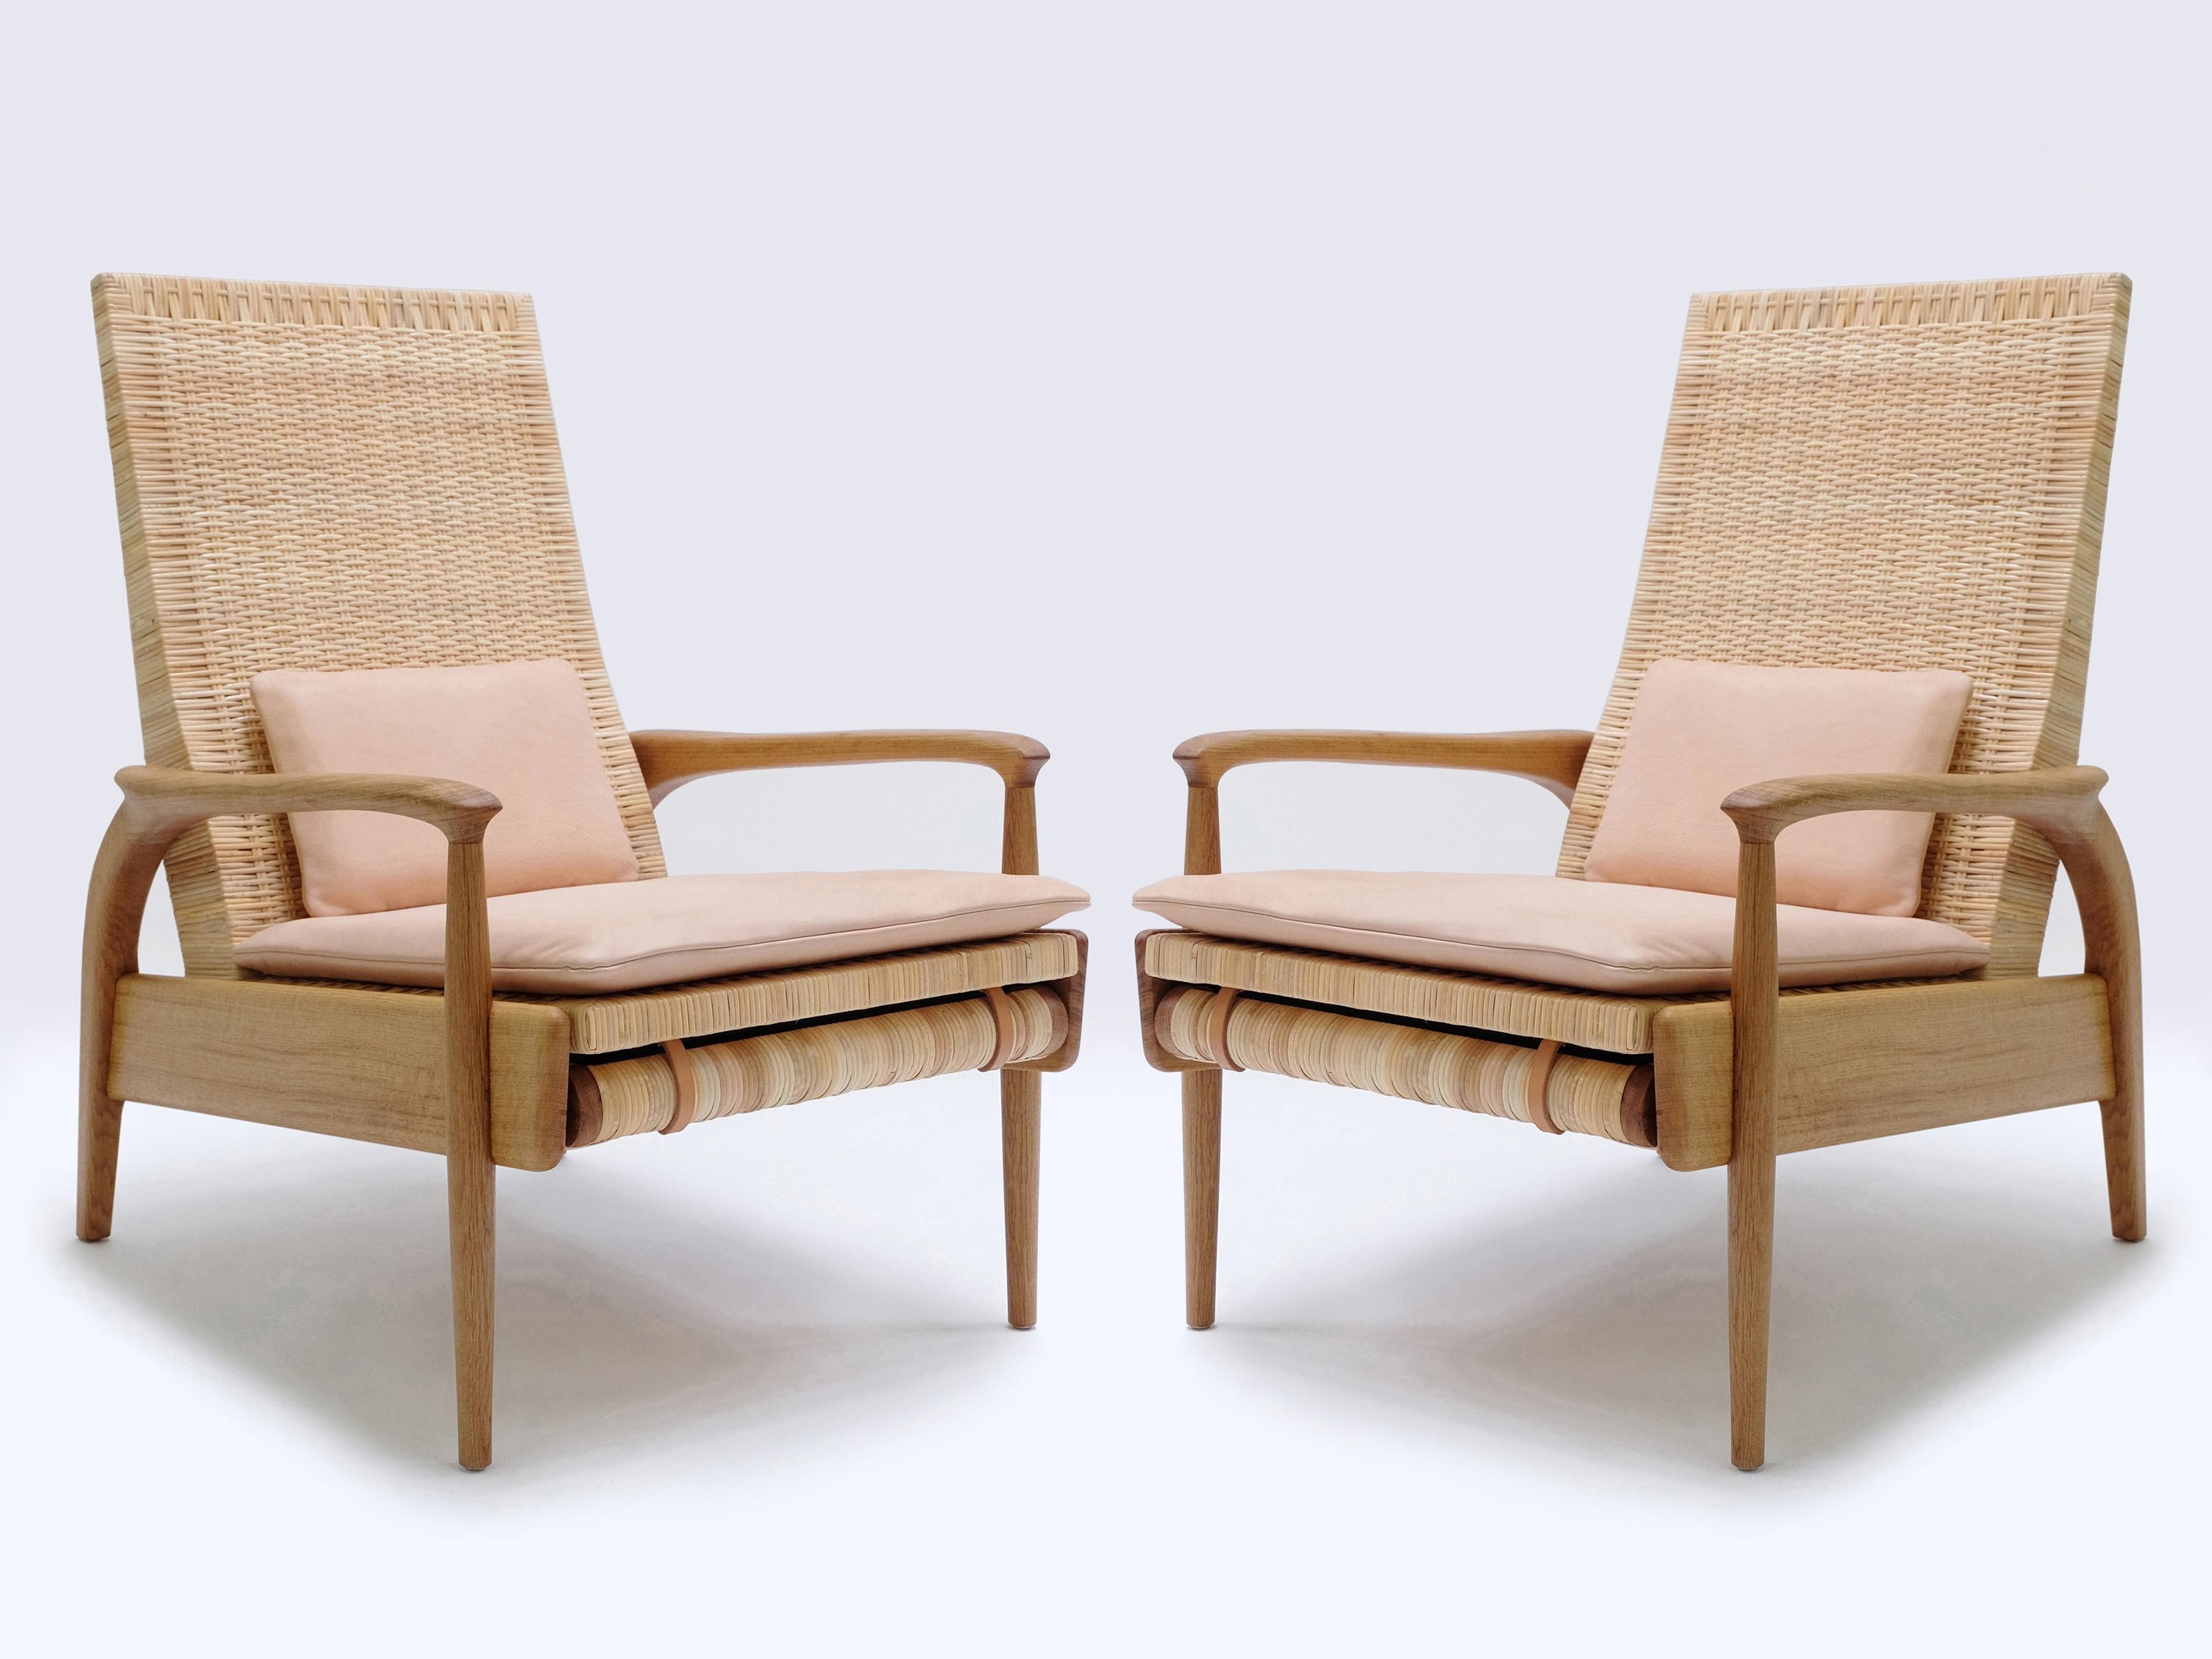 Pair of Reclining Armchairs, Solid Oak, Handwoven Natural Cane, Leather Cushions For Sale 6